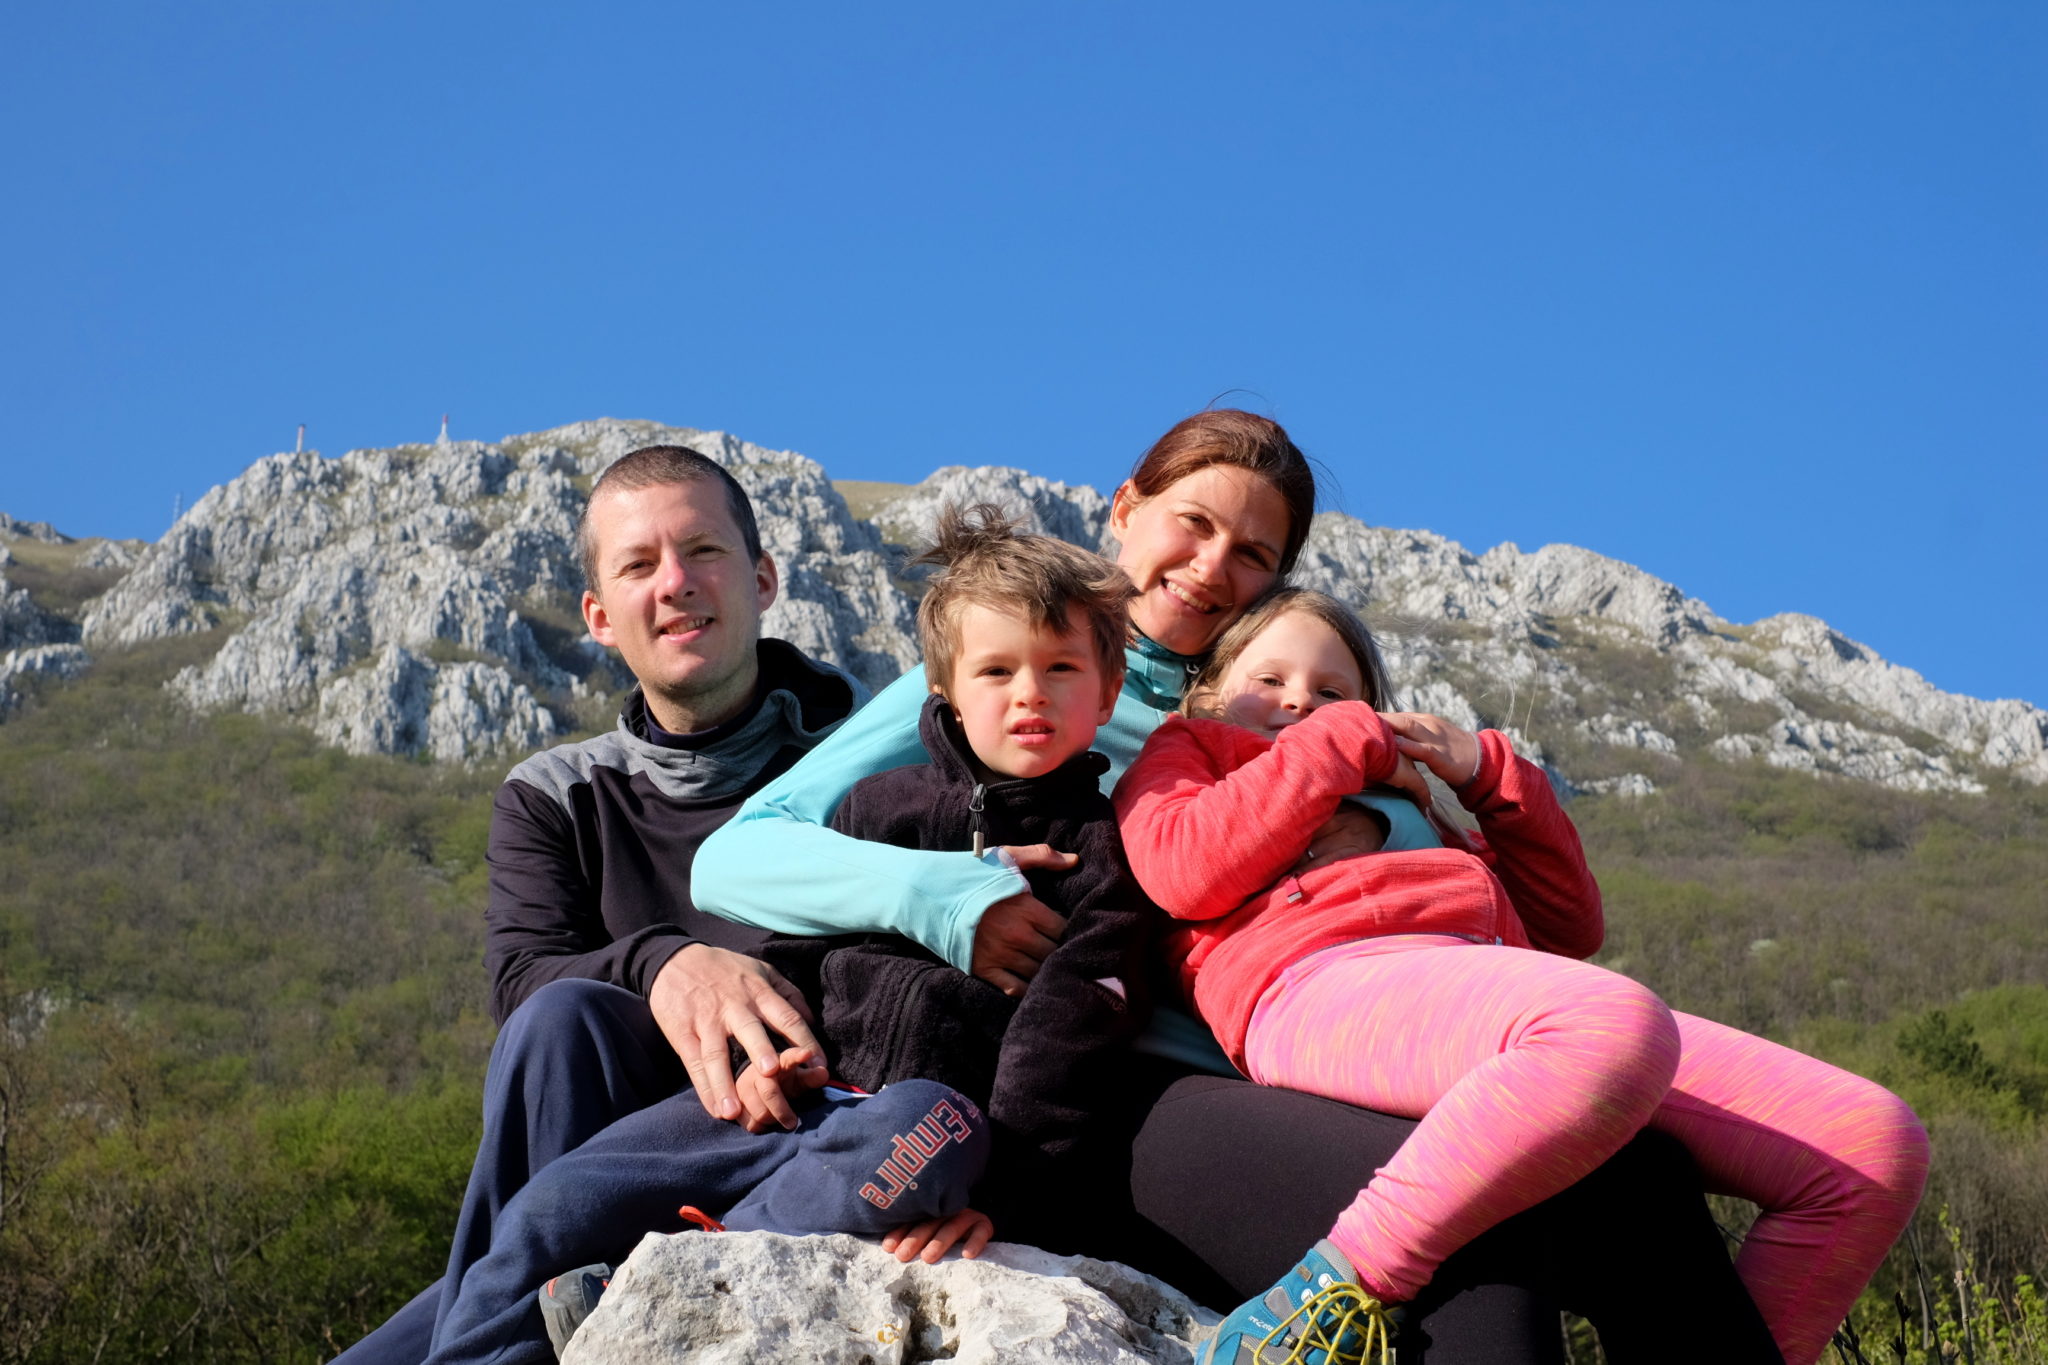 Outdoor family under the mountains